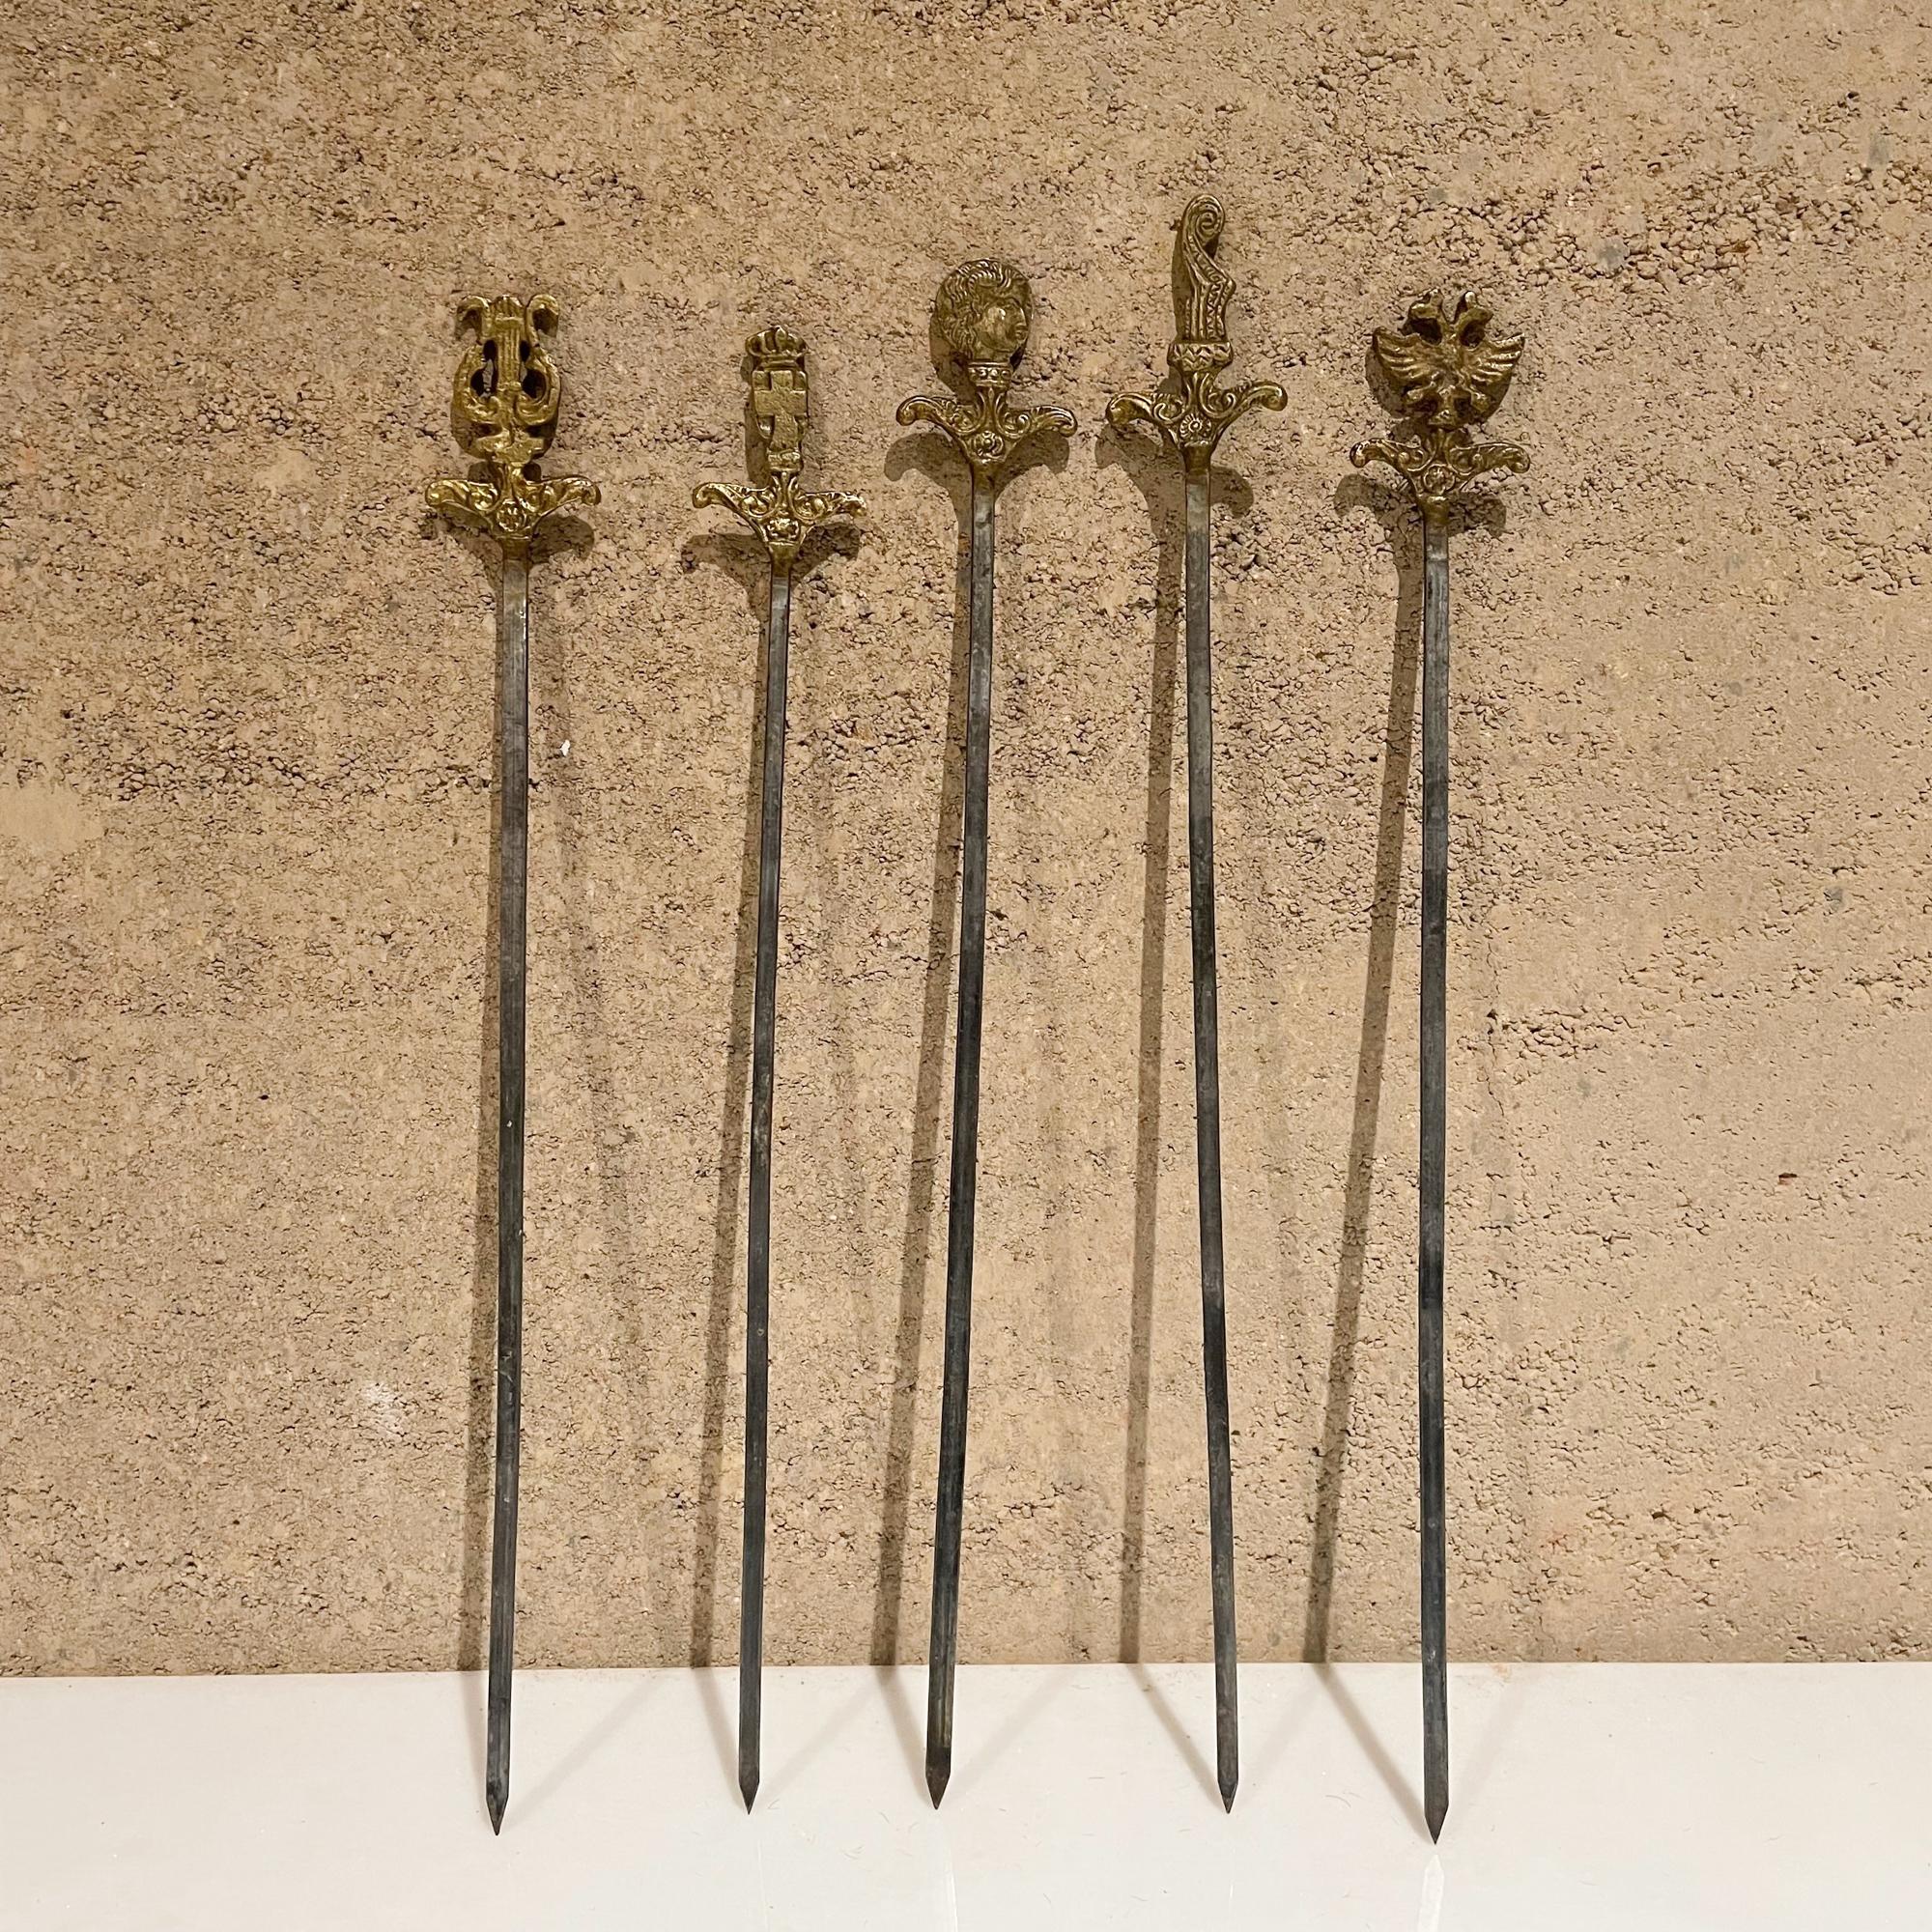 Grill set
Fancy vintage regal set of five BBQ ornate roasting grill skewers in steel with brass handle ornamentation.
Measures: 15.25 x 1.75 x .13D inches
Unrestored preowned vintage condition.
Refer to images.

 